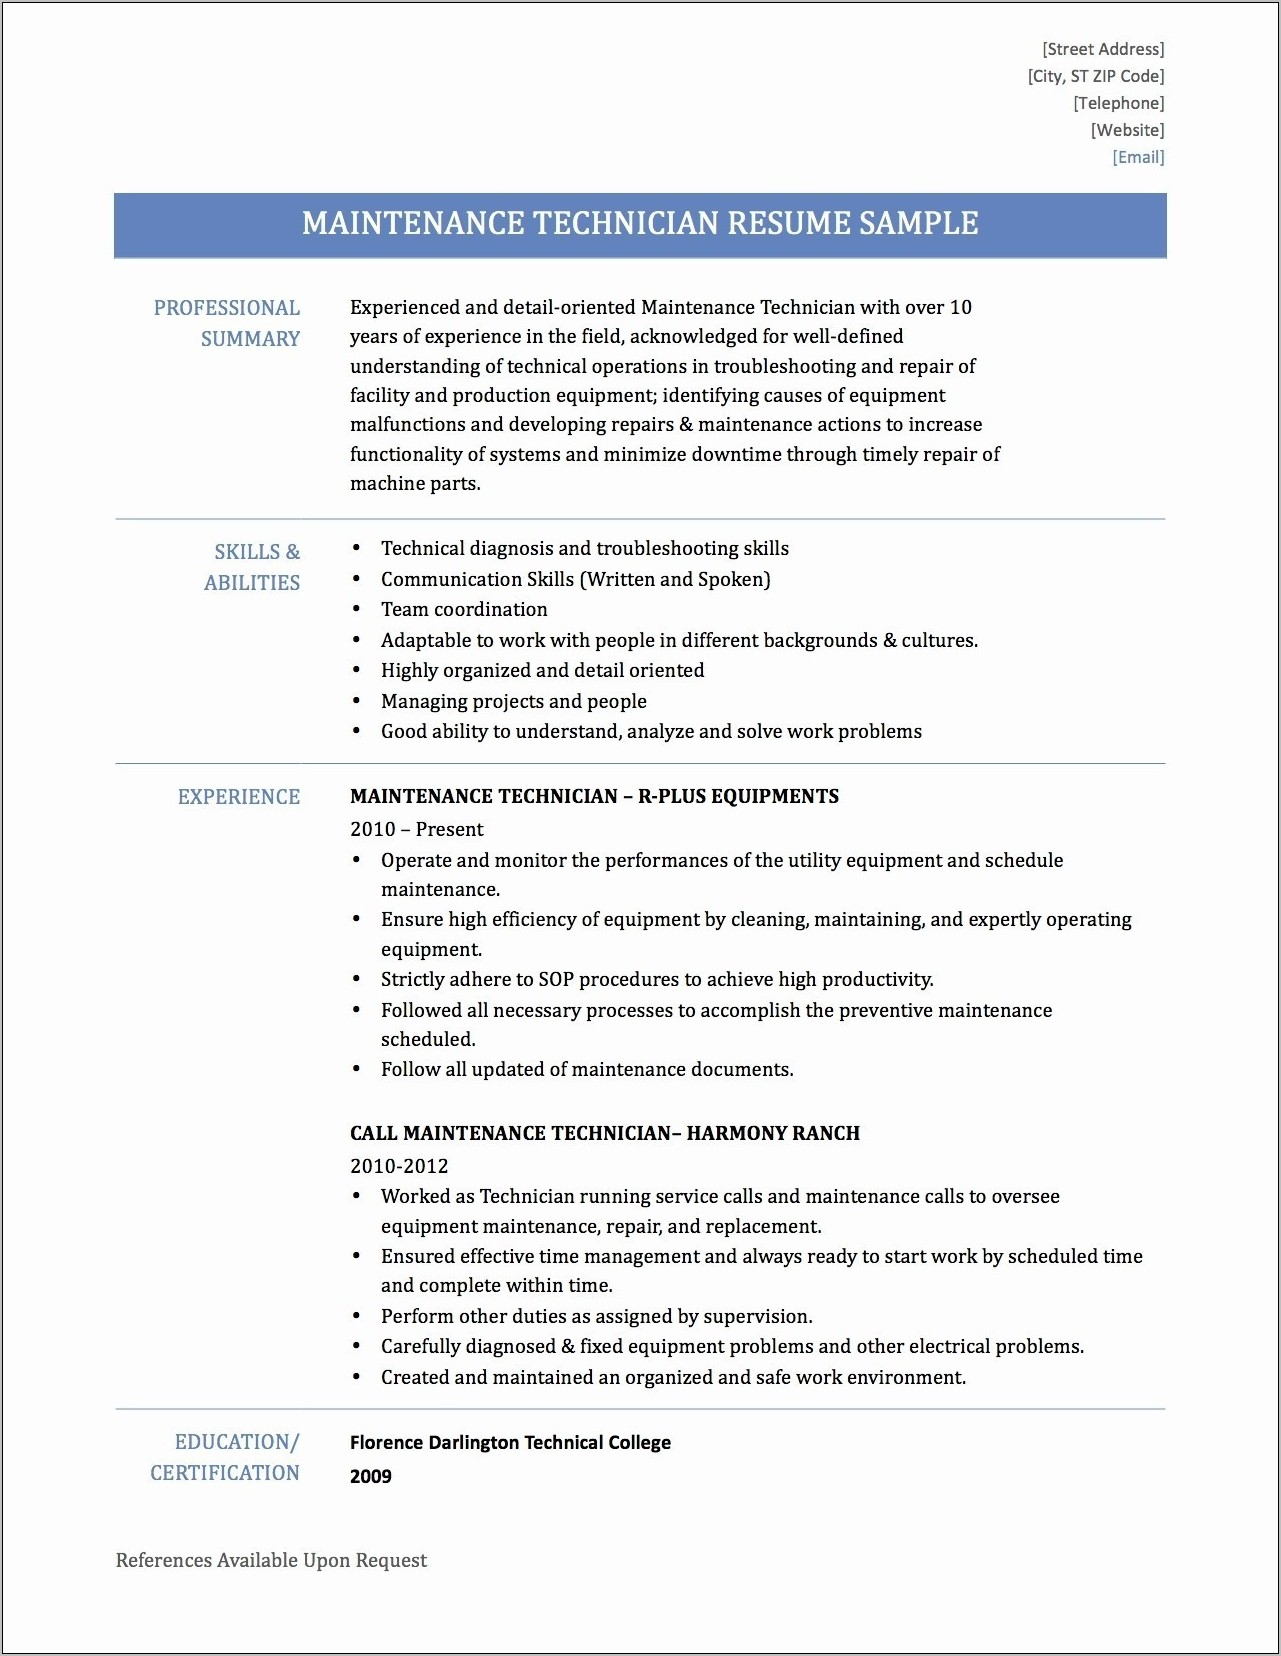 Sample Resume For Electrical Maintenance Technician